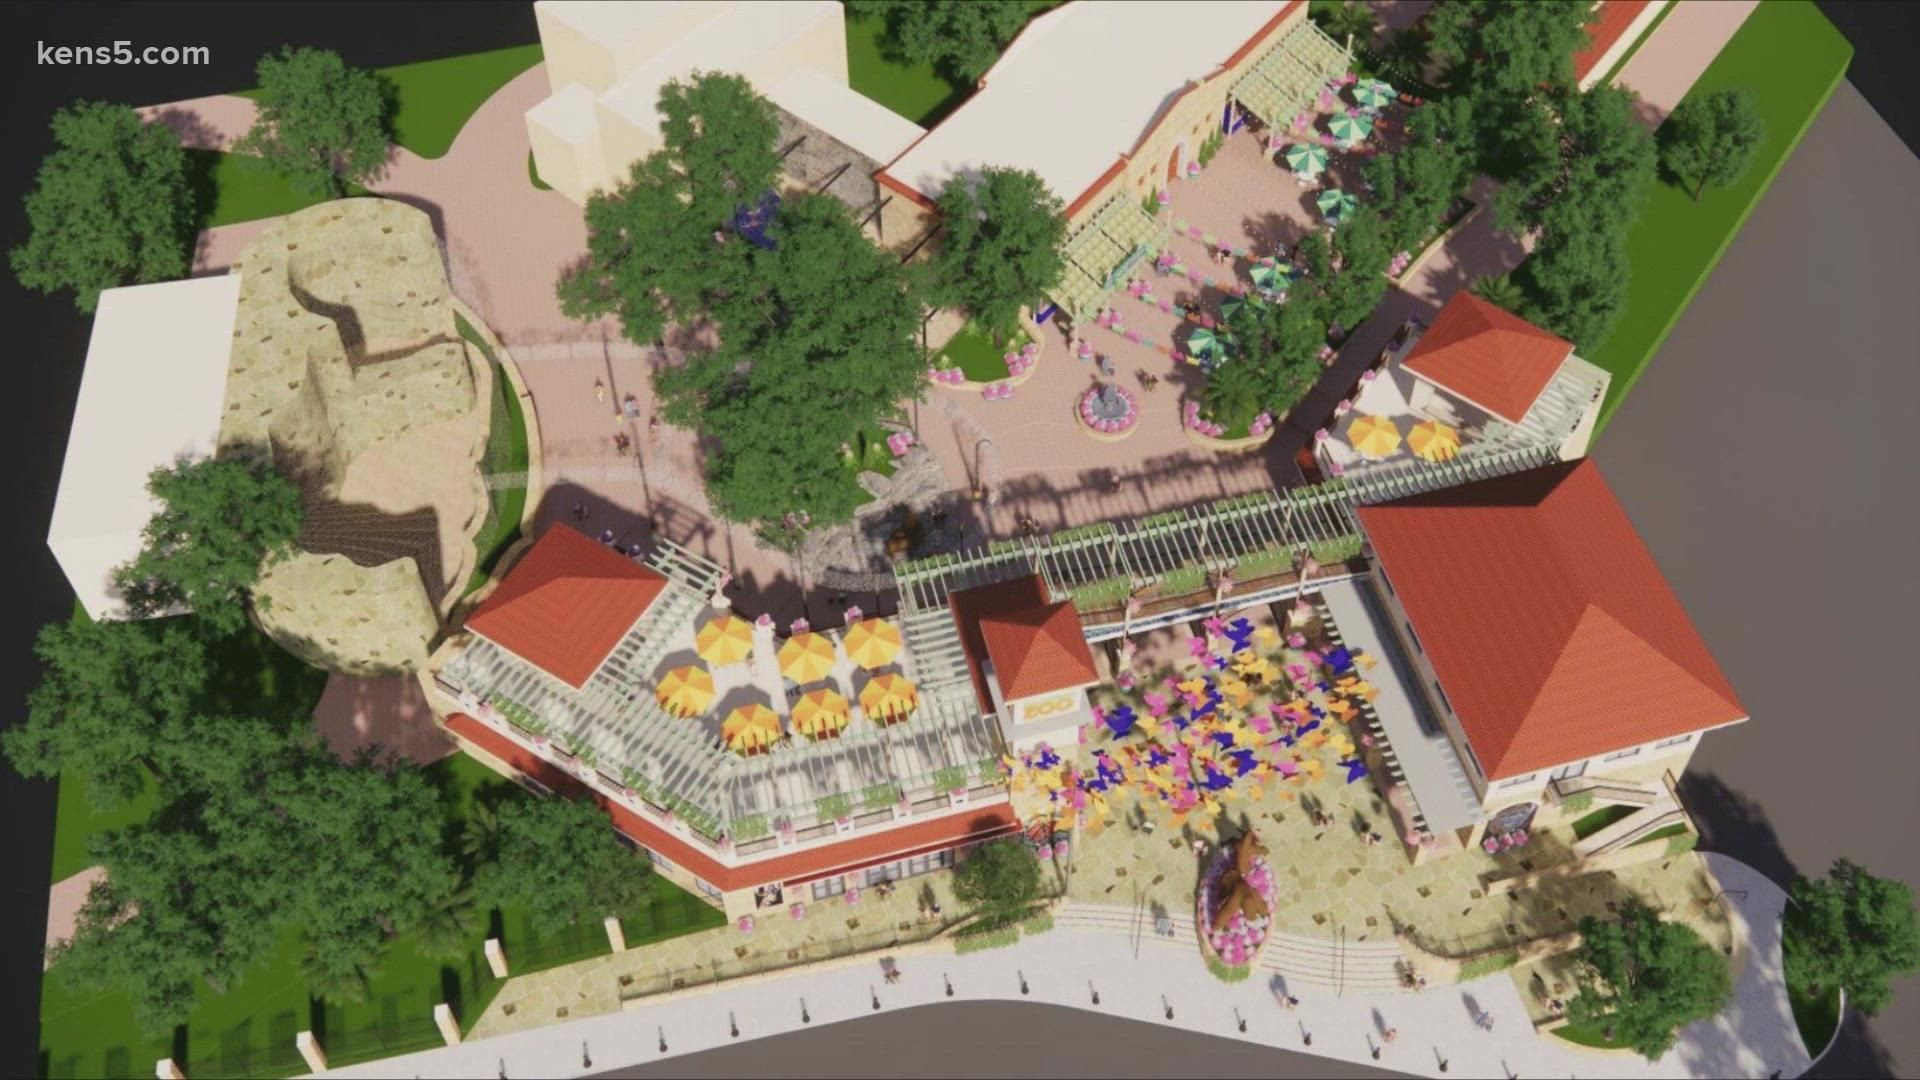 A huge makeover is in the works right now for the San Antonio Zoo. The master plan starts with redesigning the entrance.